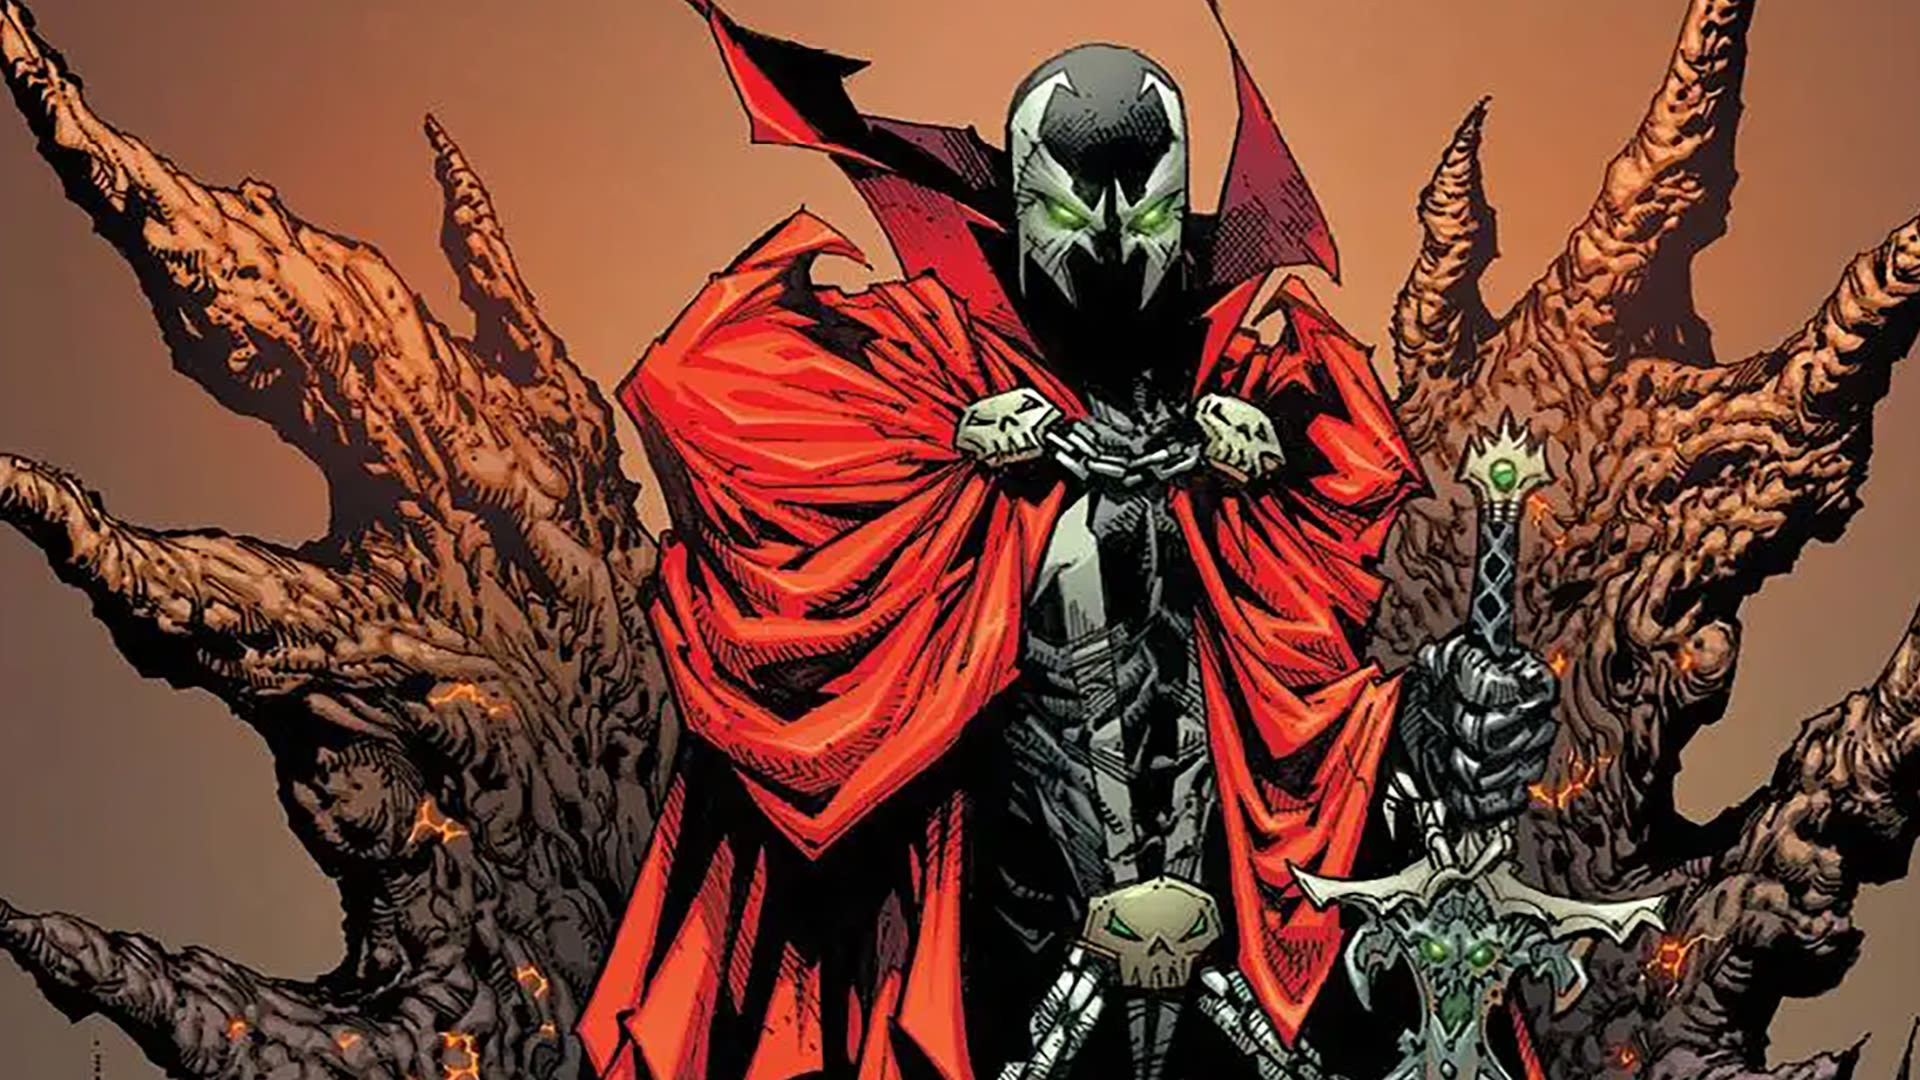 Todd McFarlane's long in-development Spawn movie just got a major update from producer Jason Blum that changes the whole concept